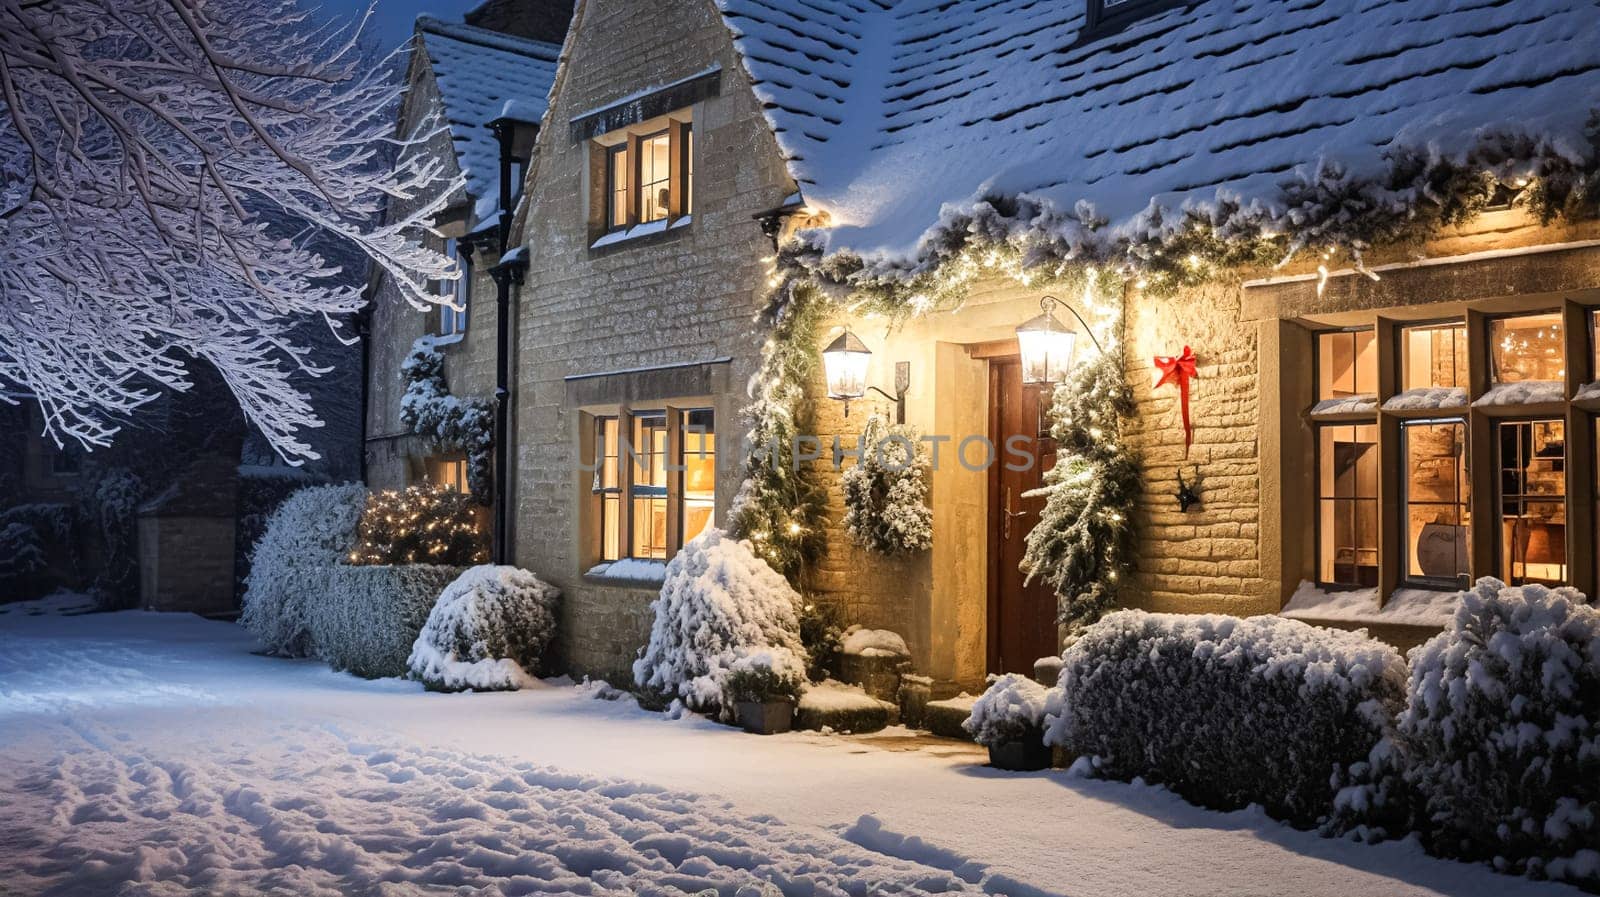 Christmas in the countryside, cottage and garden decorated for holidays on a snowy winter evening with snow and holiday lights, English country styling by Anneleven